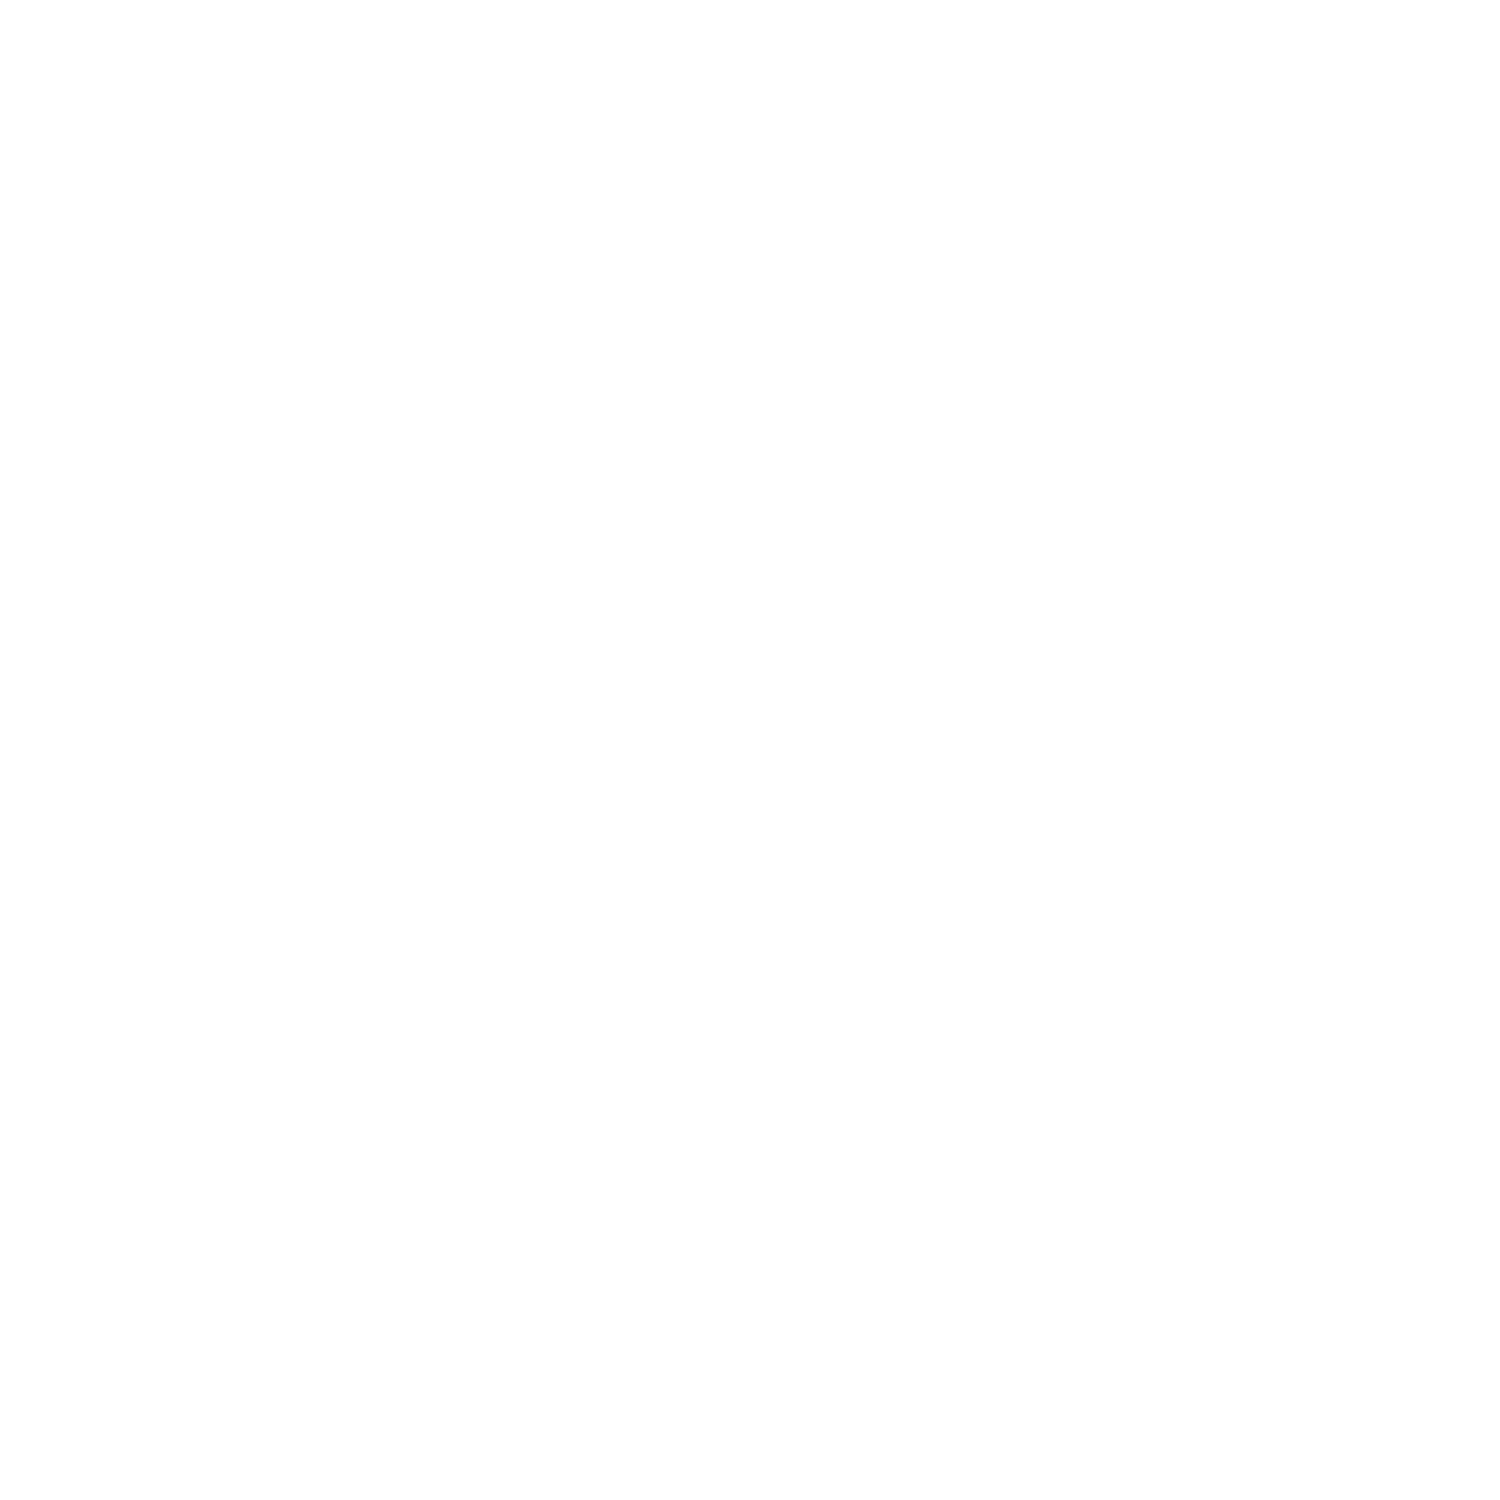 Elevate Lending - Professional Mortgage Broker and Financial Services